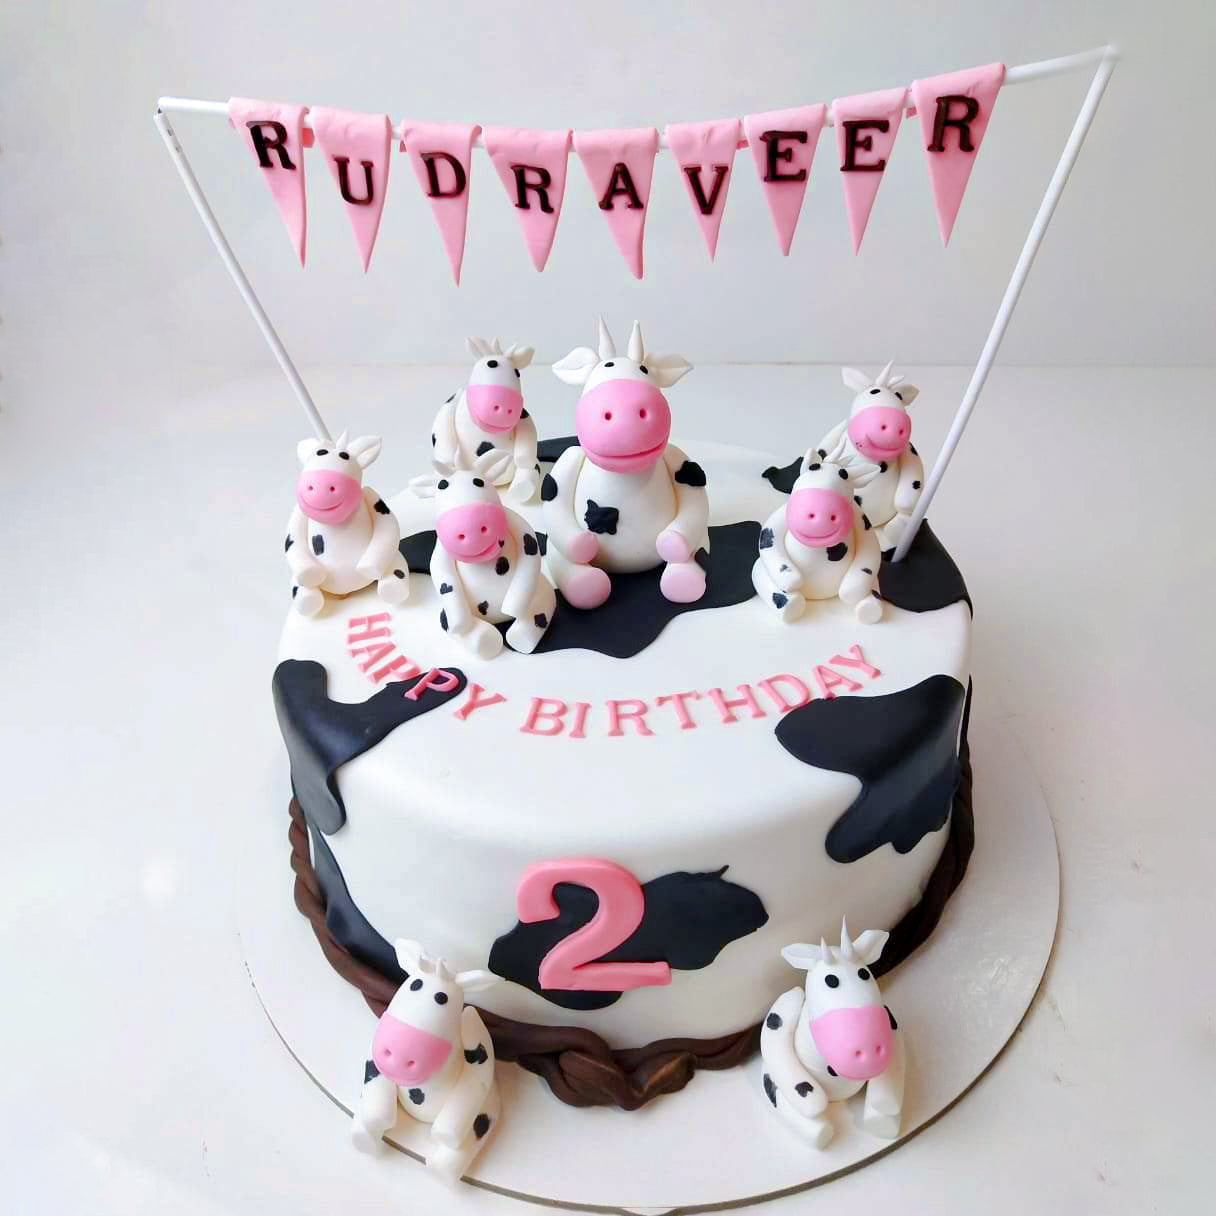 18 Easy Birthday Cake Ideas for Kids and Adults | Be A Fun Mum